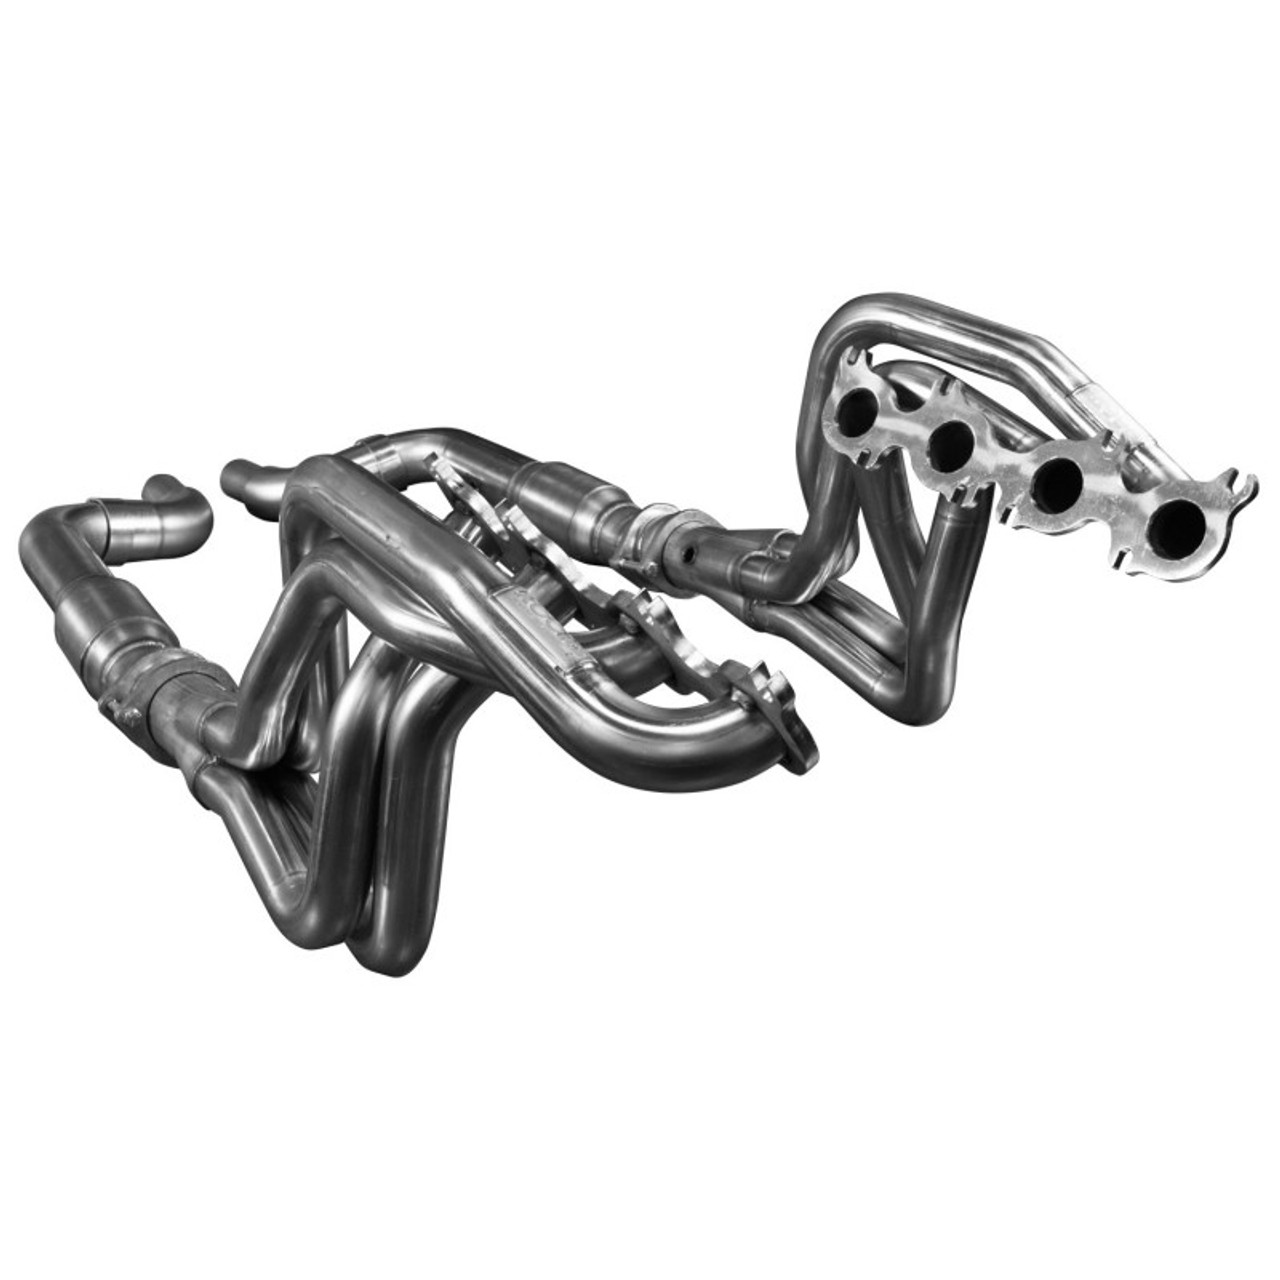 Kooks 1151H421 - Kooks 15+ Mustang 5.0L 4V 1 7/8in x 3in SS Headers w/ Catted OEM Connection Pipe